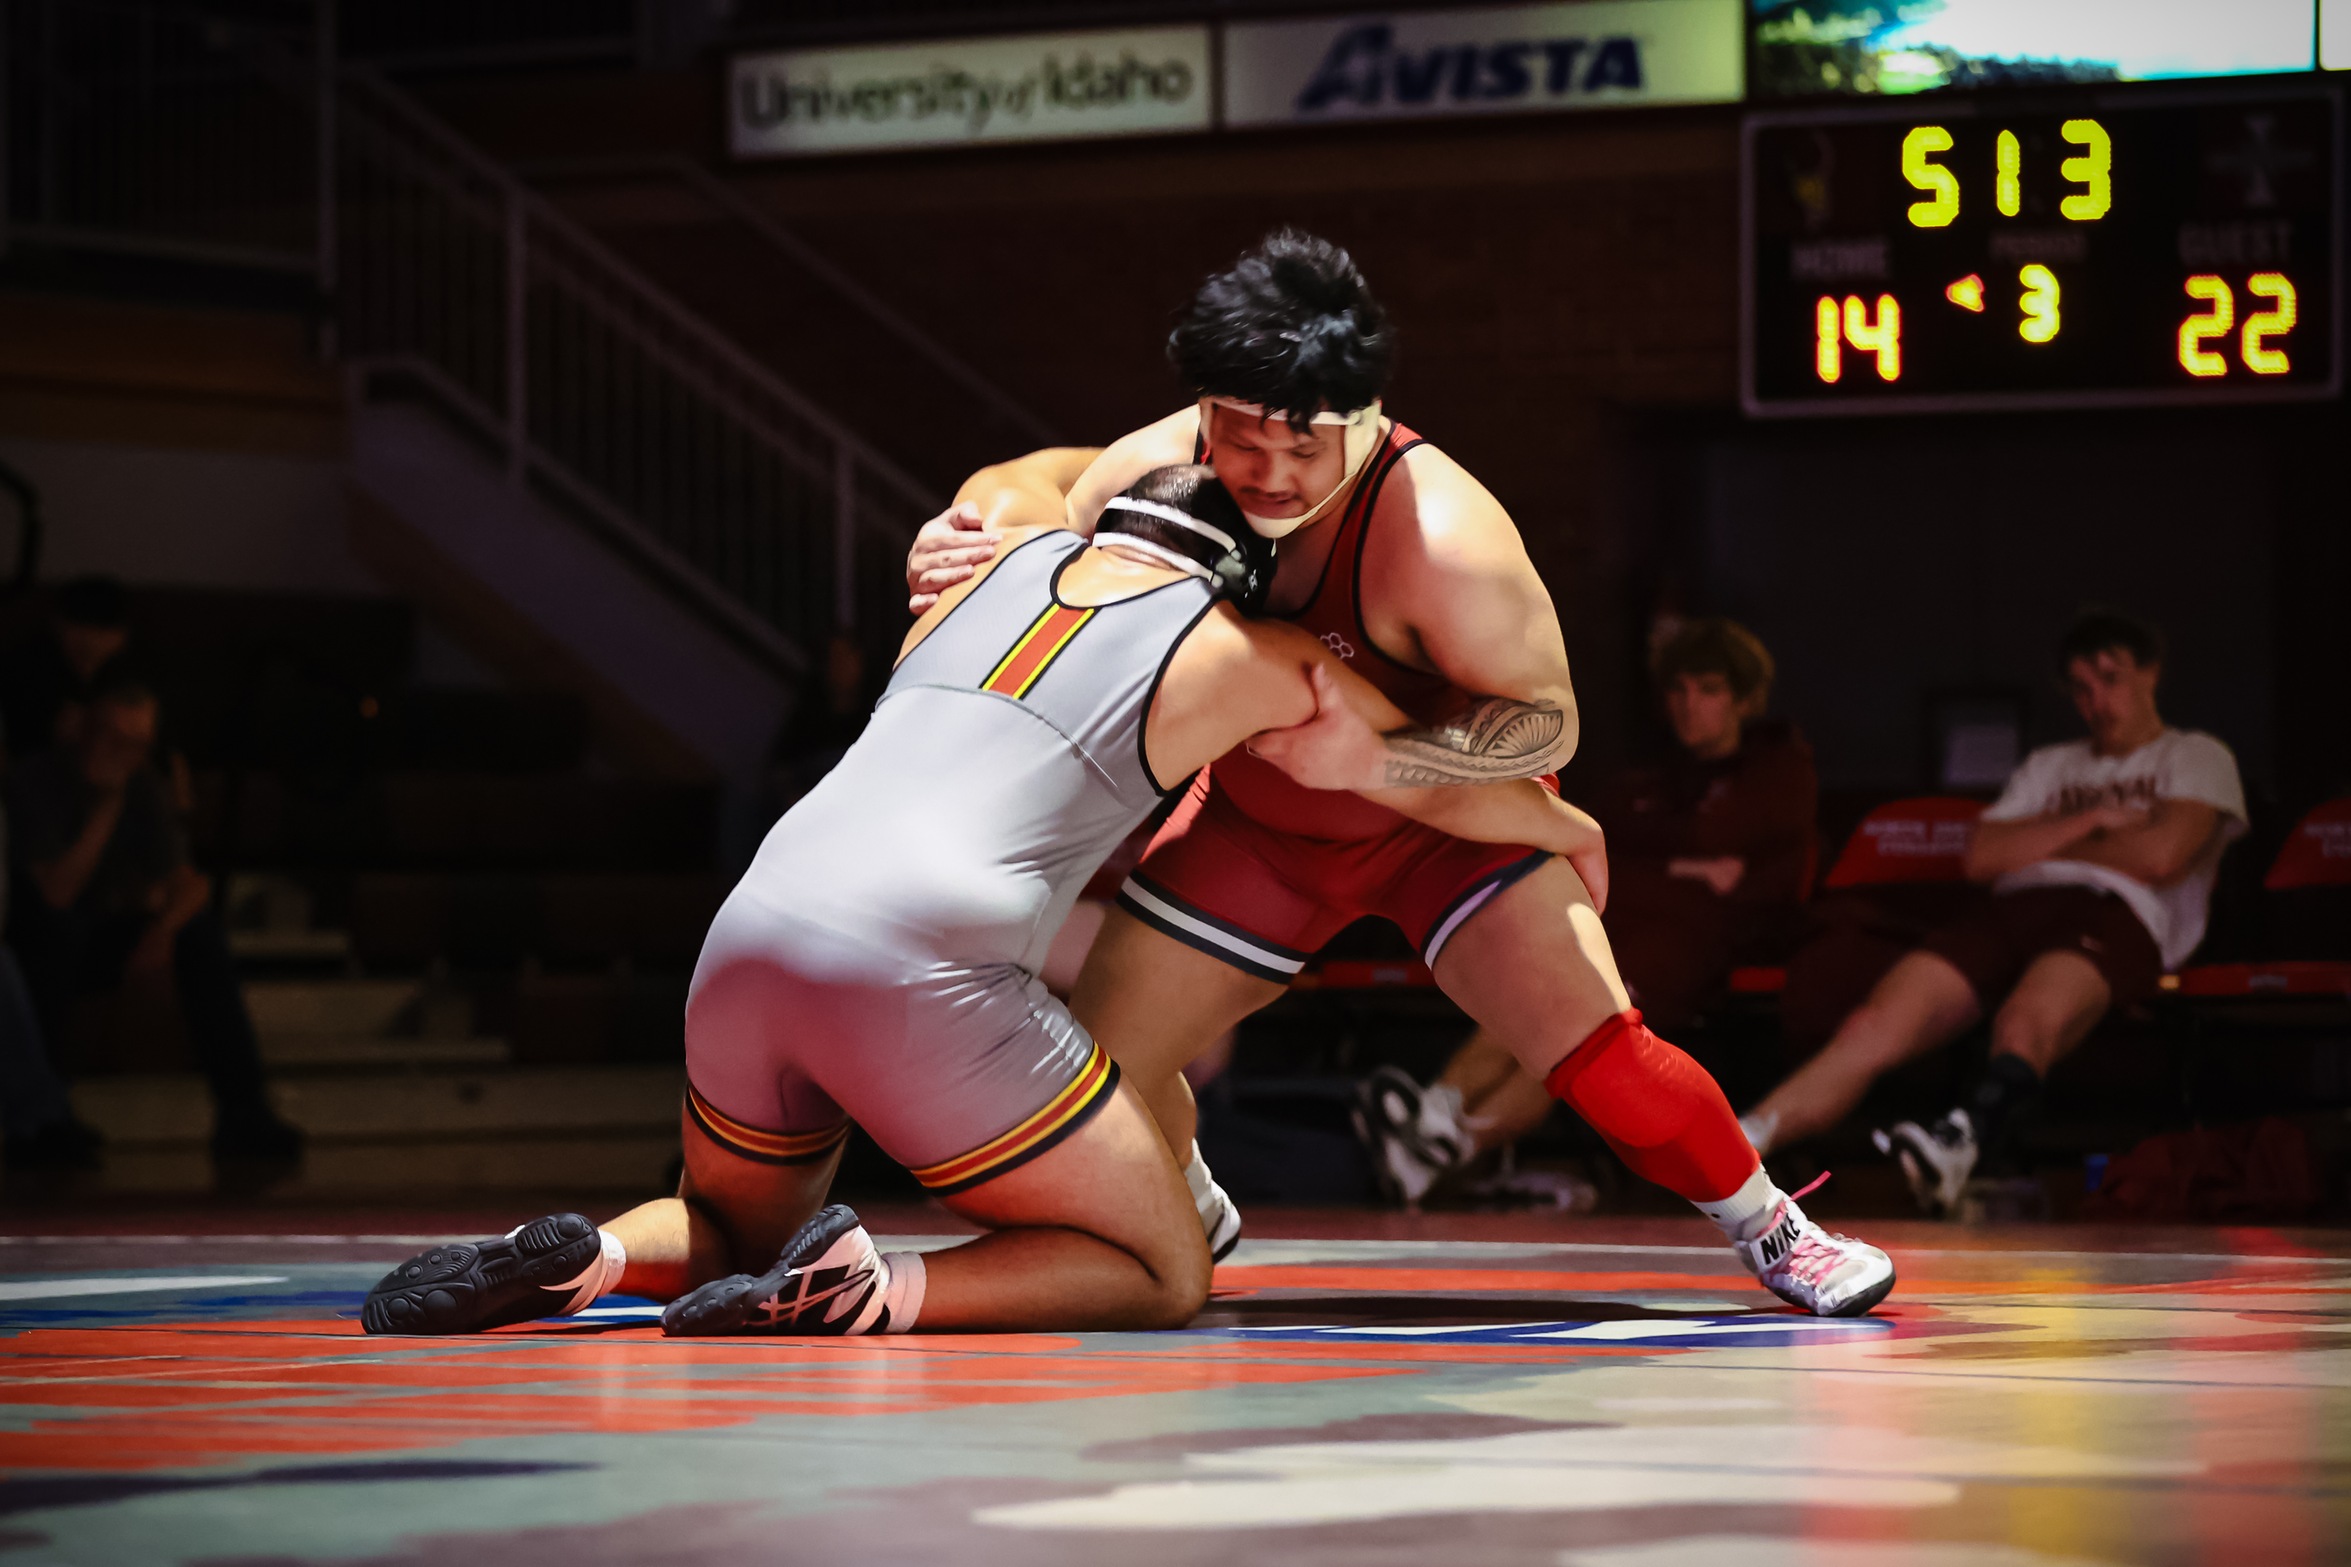 Takafua in the red vs. gray duals earlier this fall.